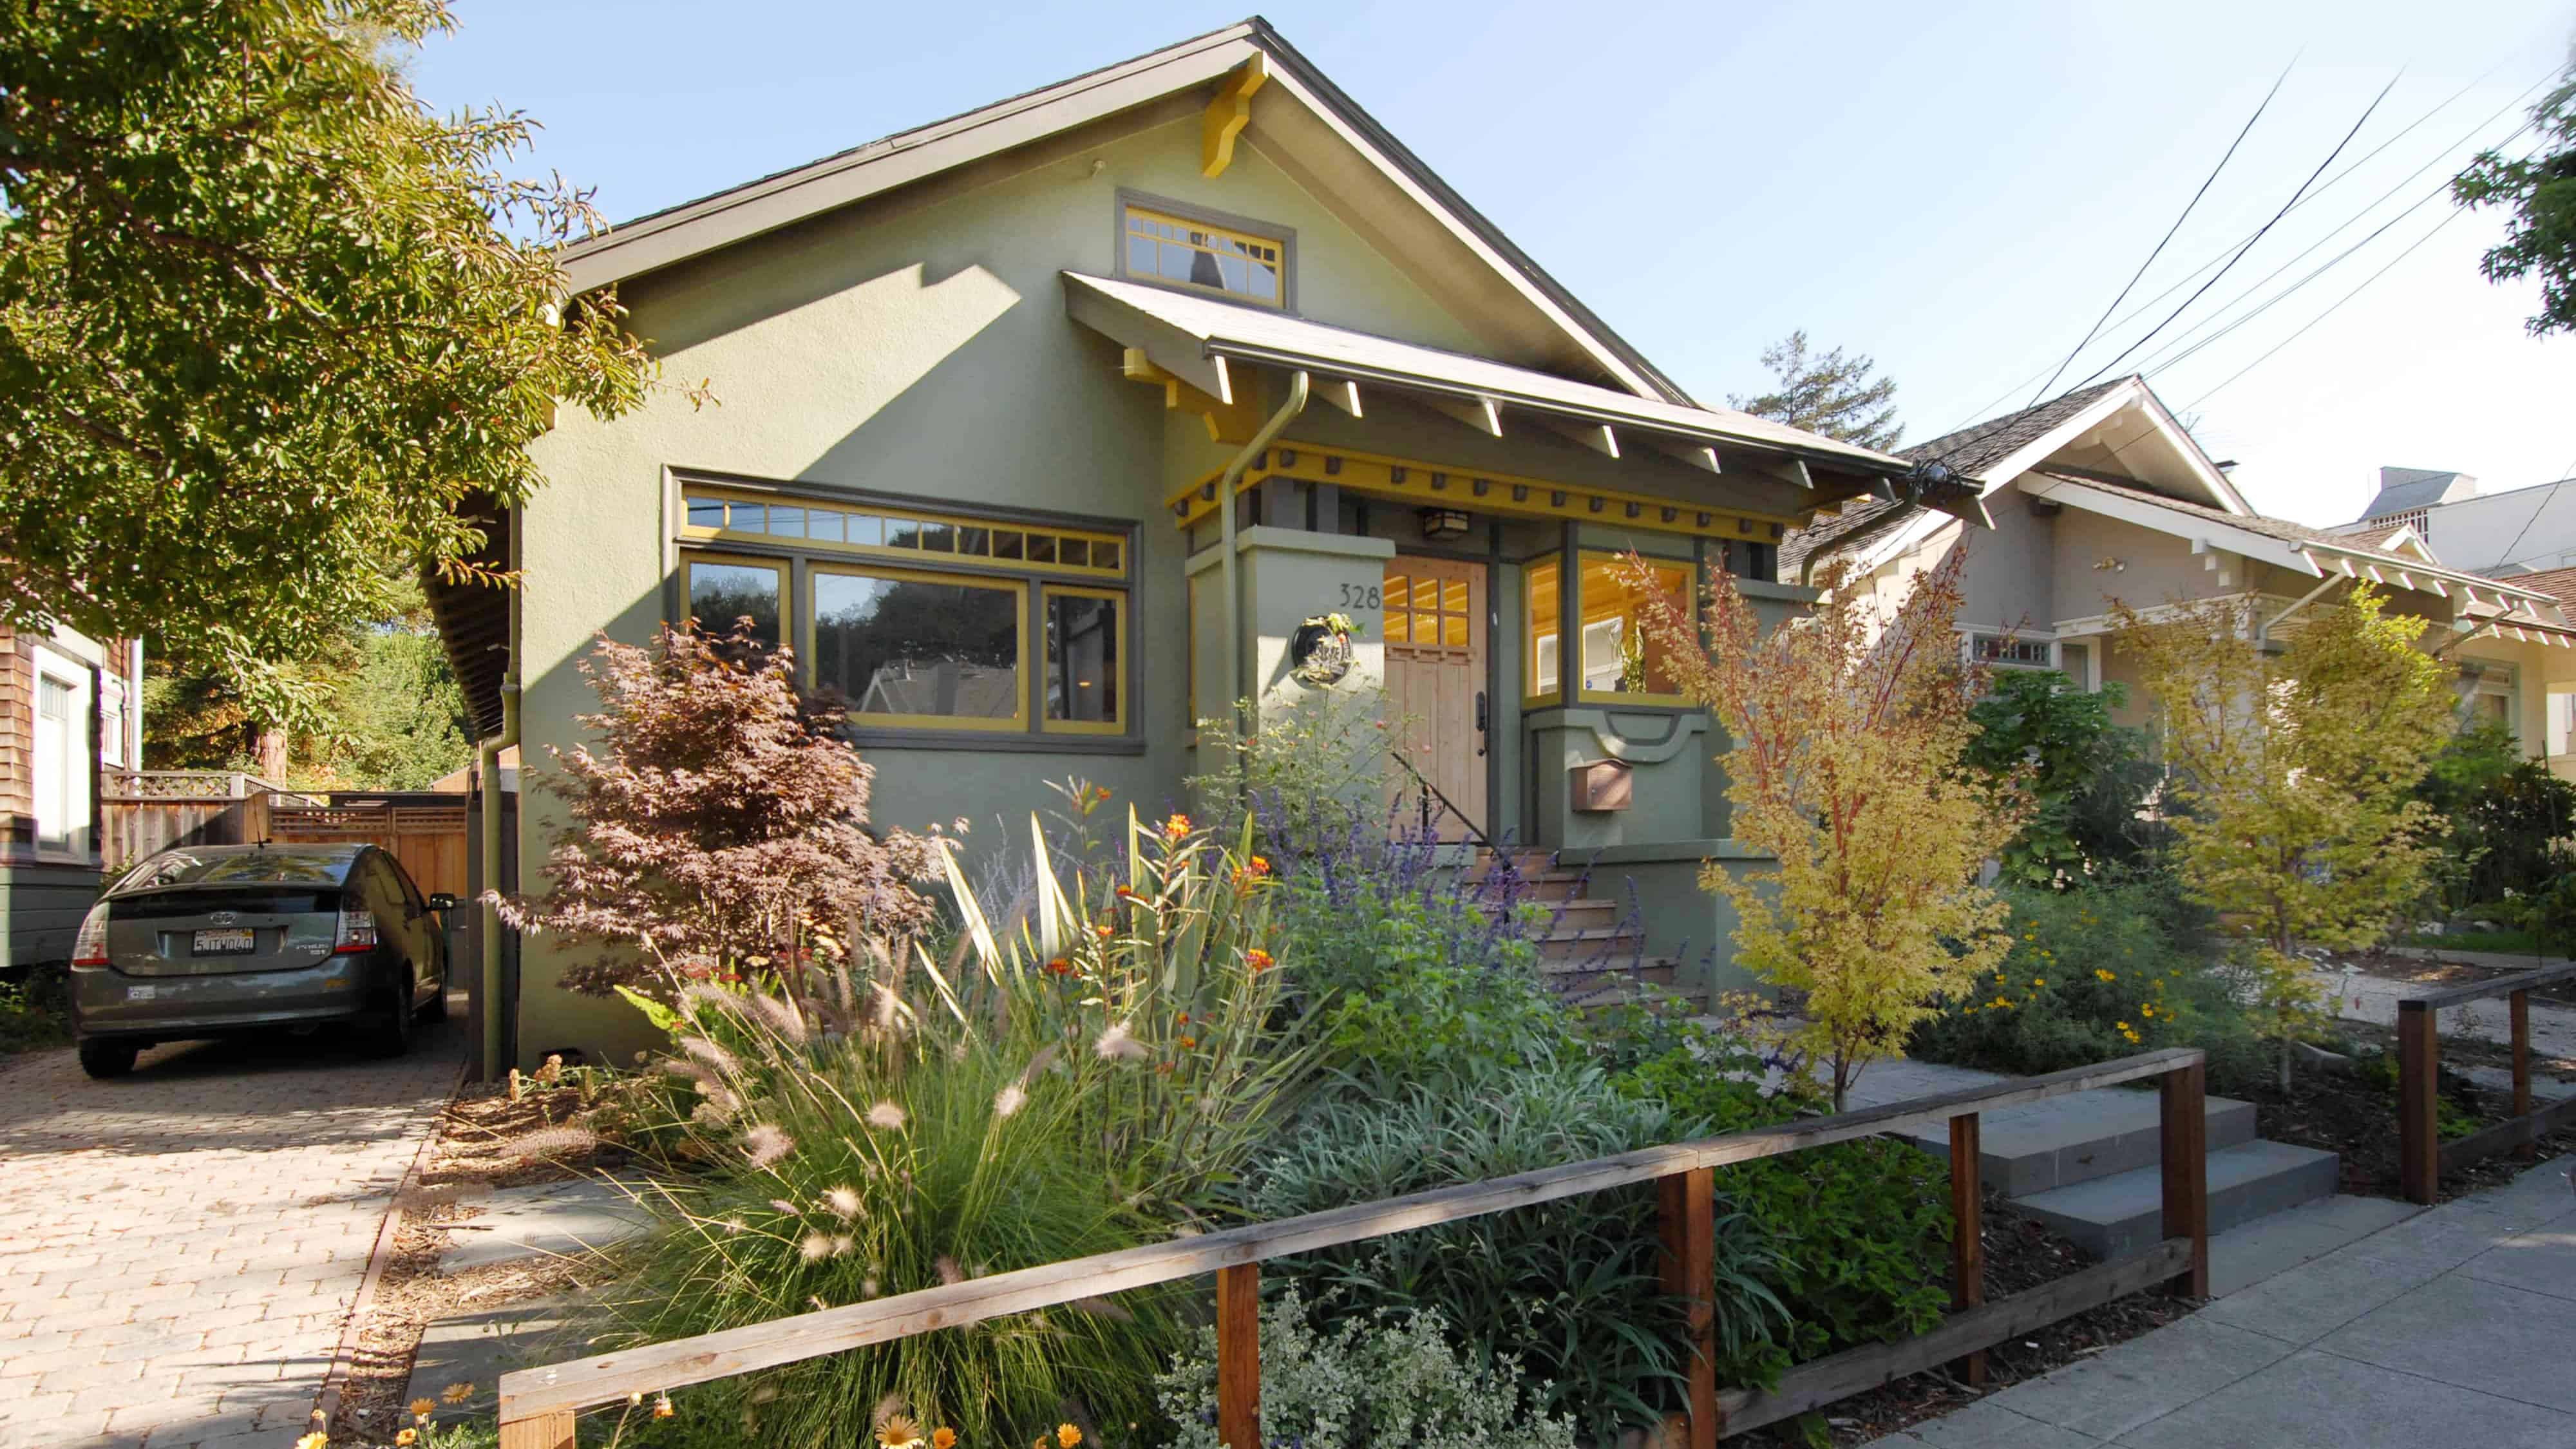 Exterior view of craftsman home with colorful landscaping.